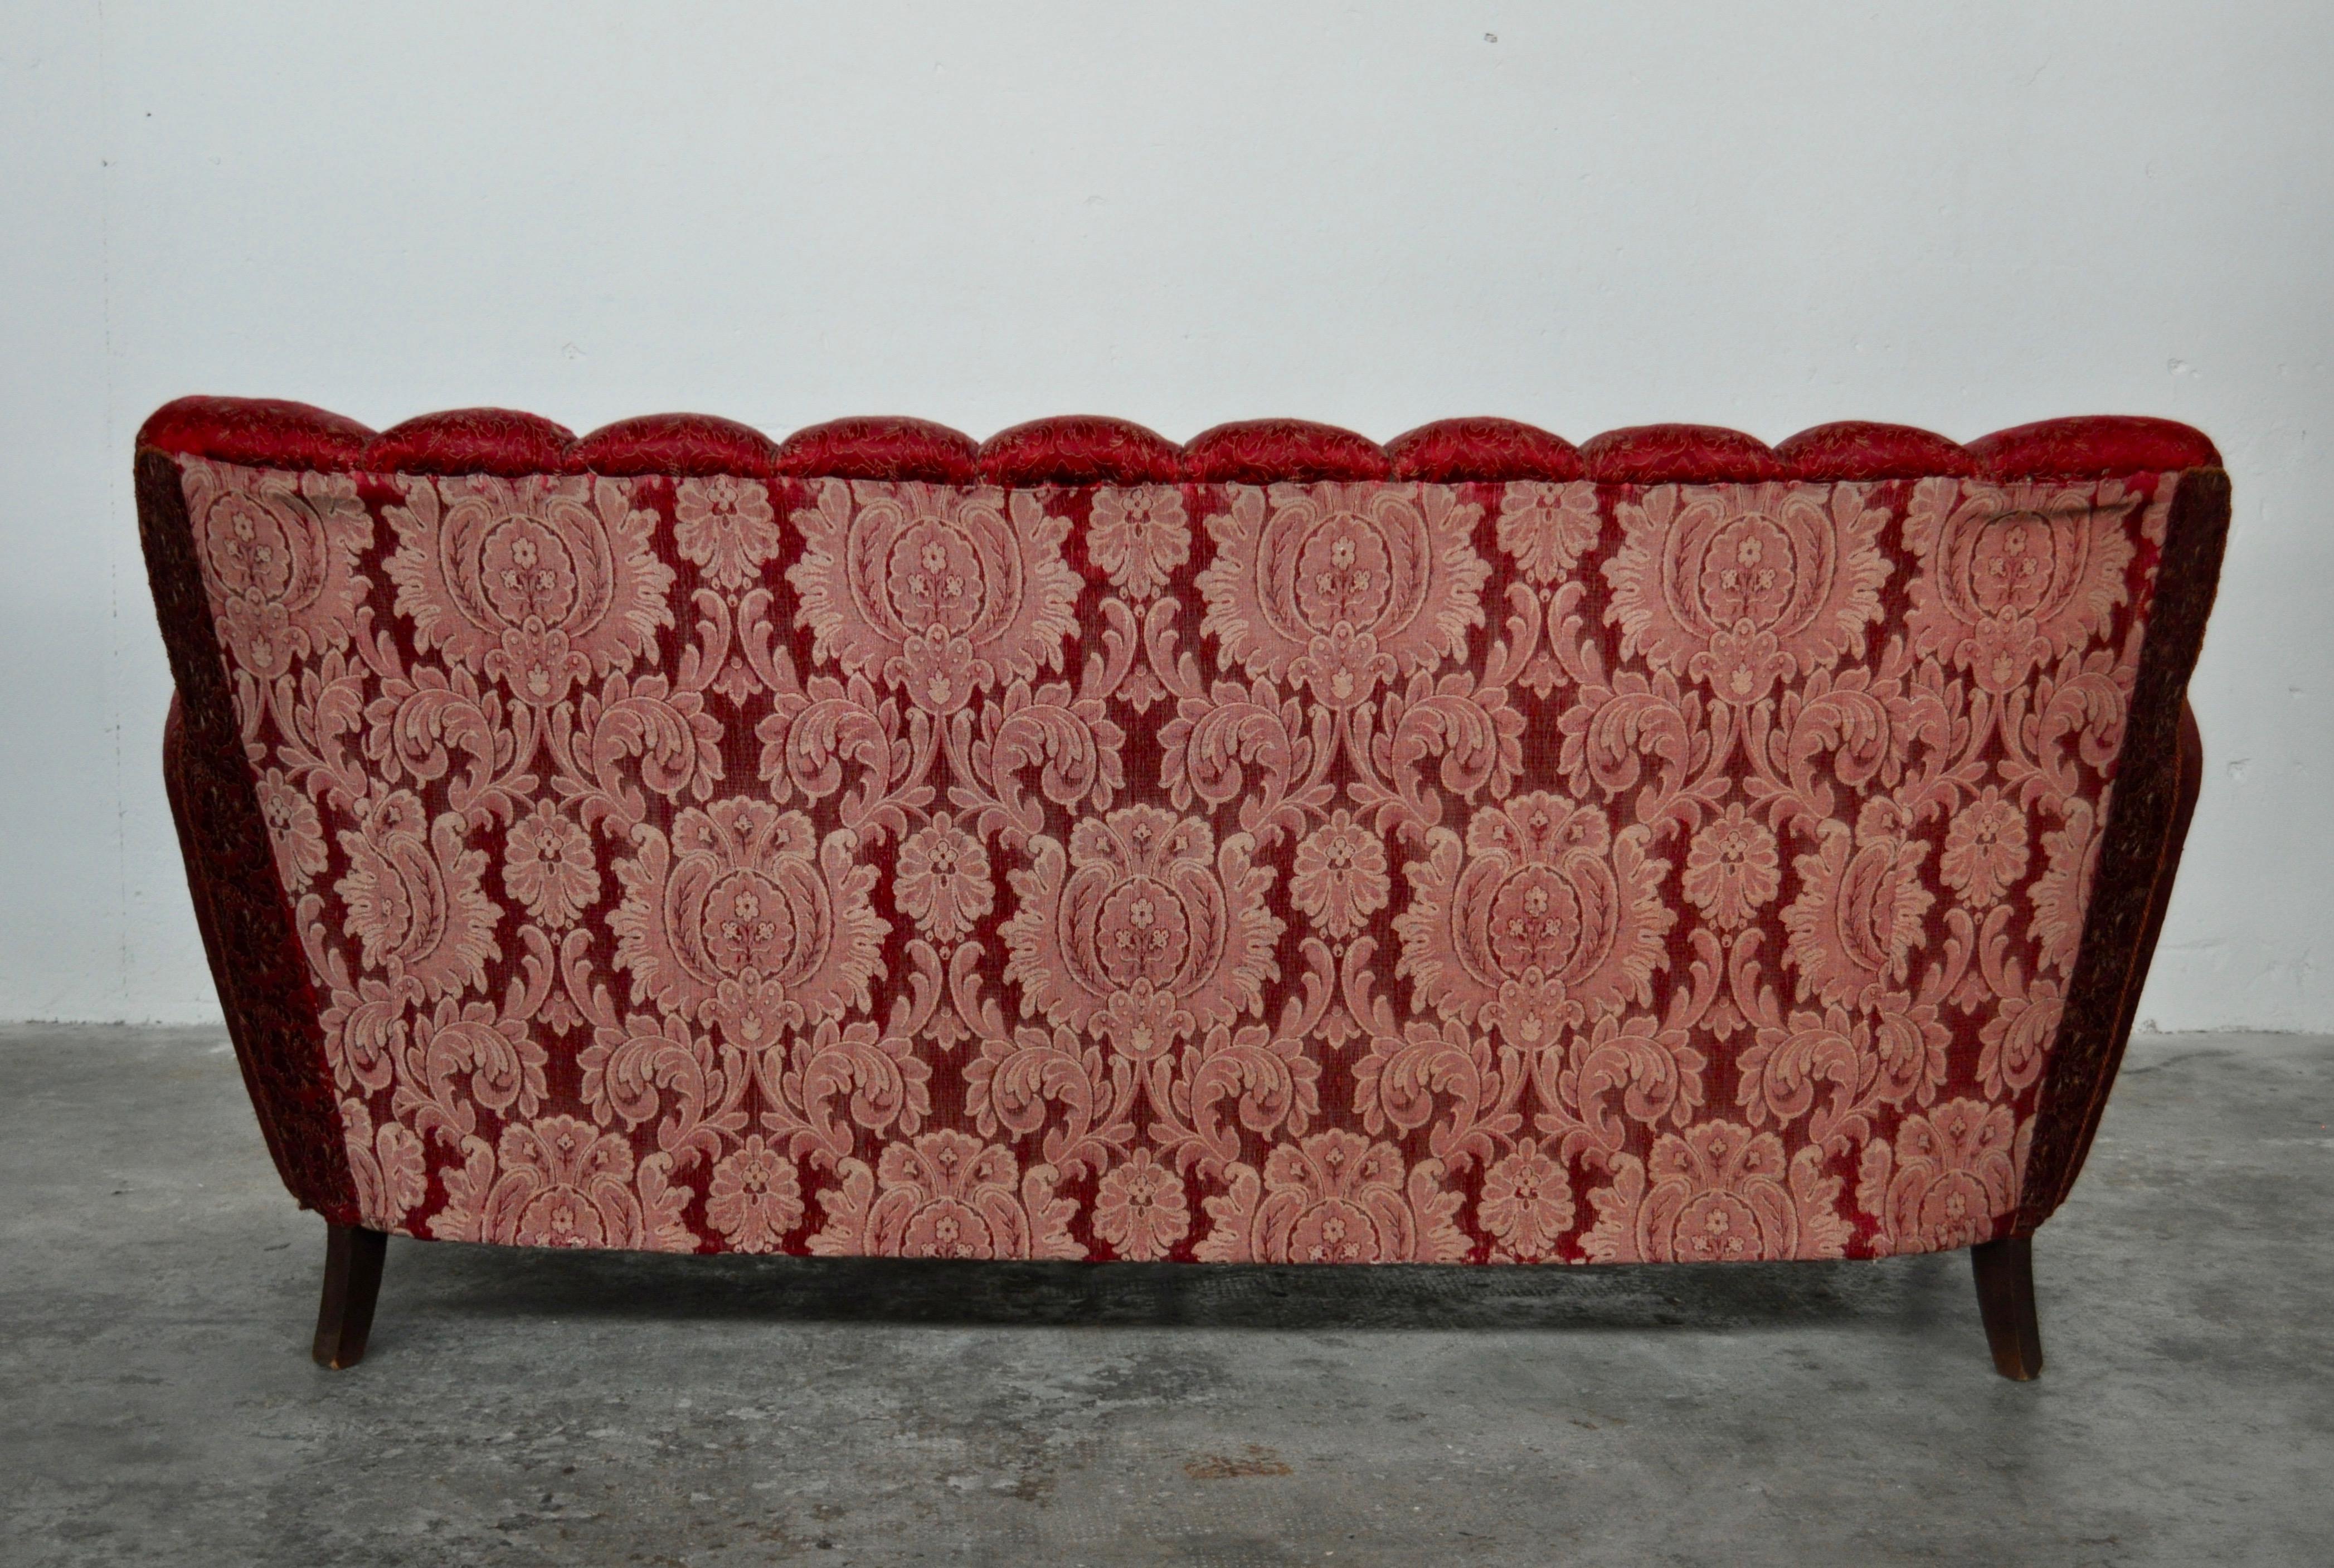 Velvet Three-Seat Sofa in Red Fabric, Gold Cord Details, by Paolo Buffa, Italy, 1950 For Sale